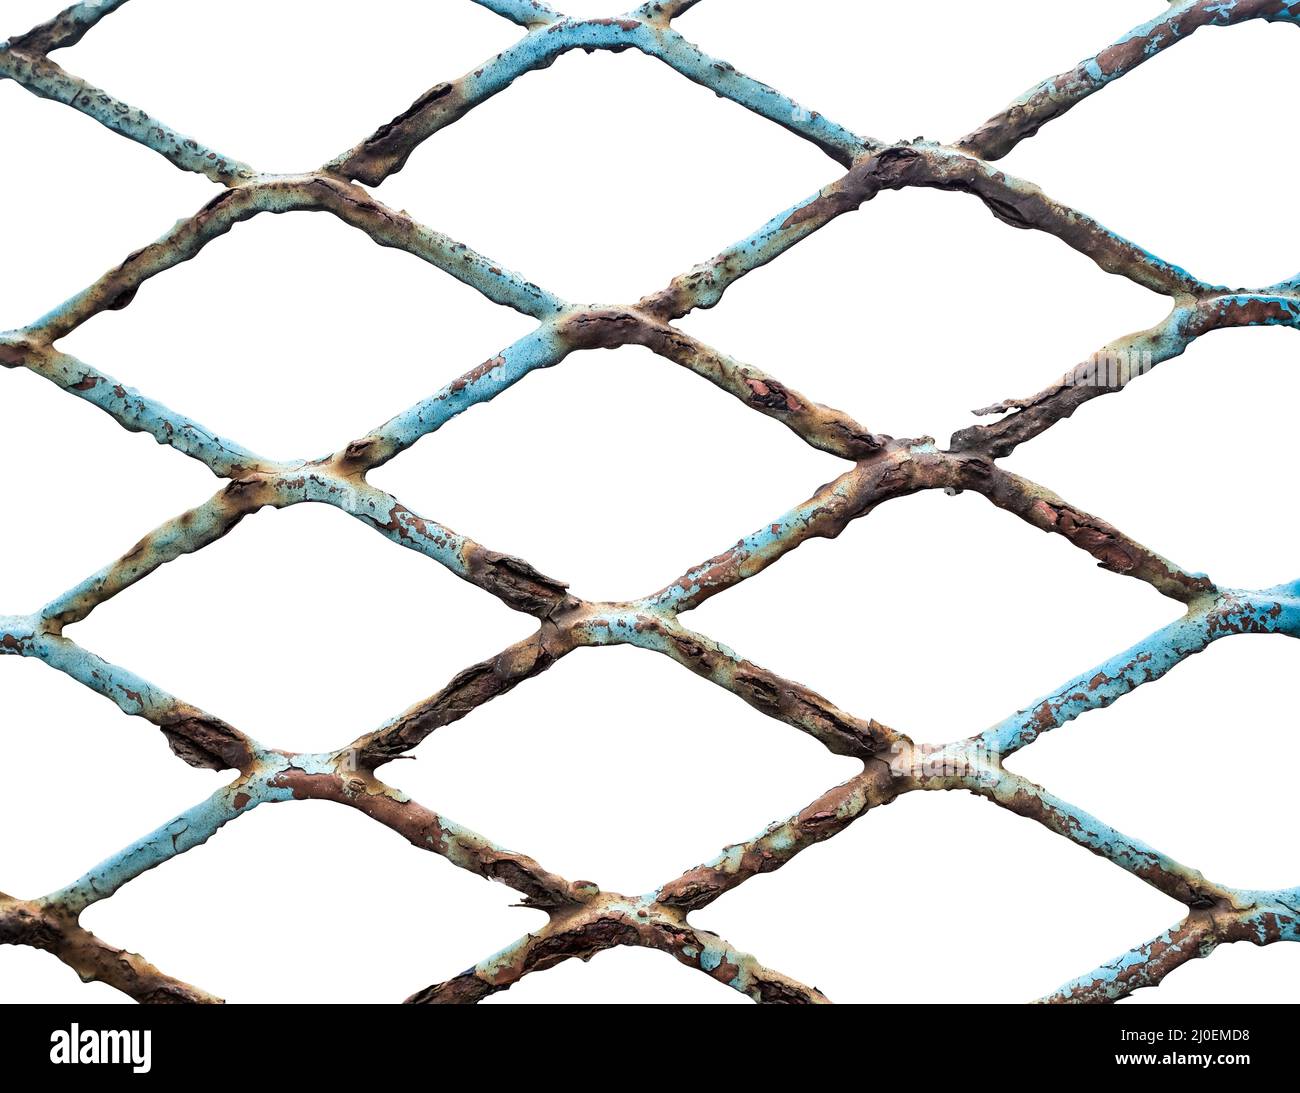 Fence isolato Old Chain link Foto Stock